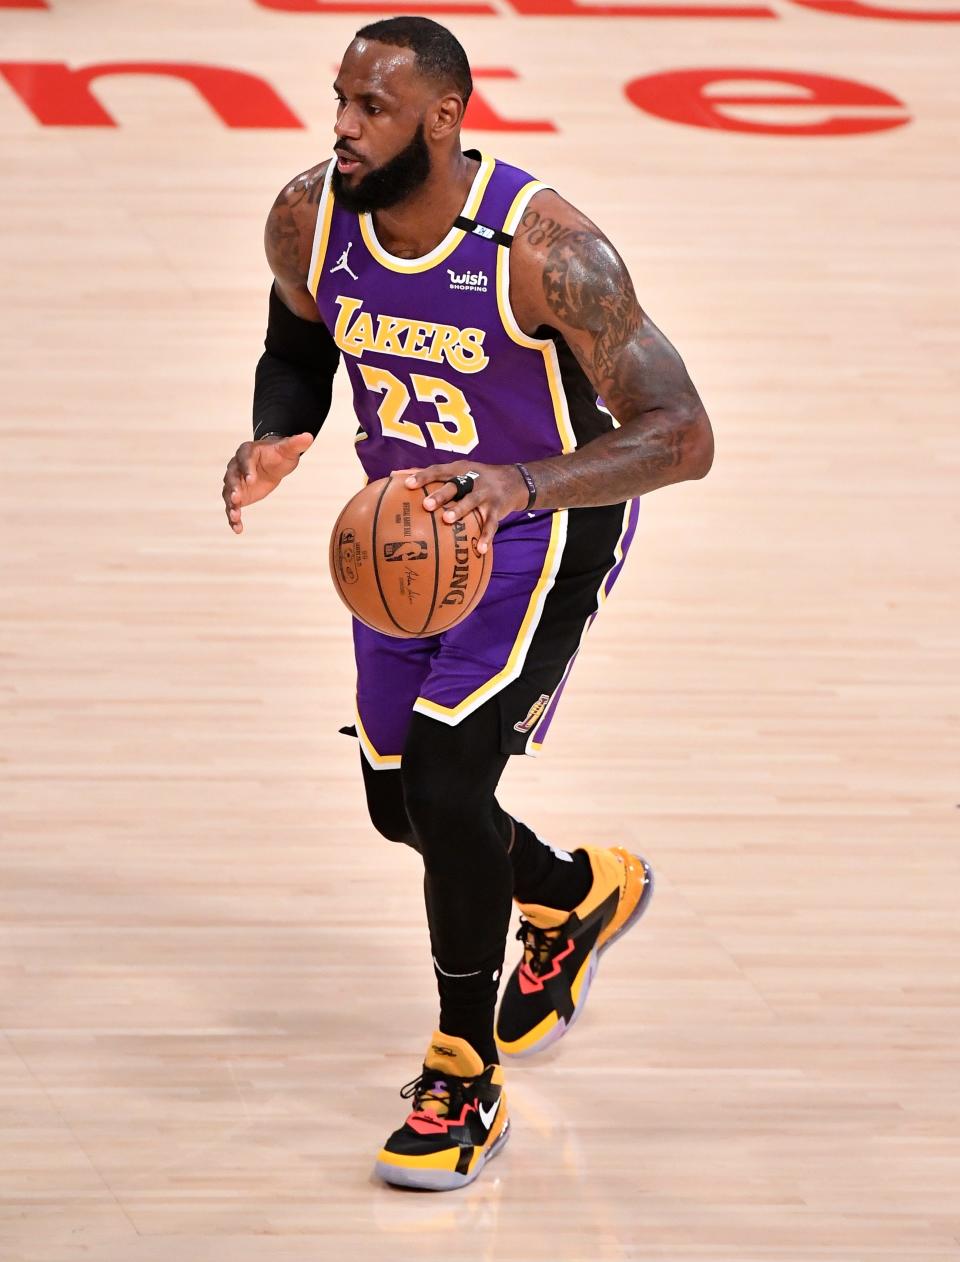 LeBron James was considered an MVP favorite until a high ankle sprain forced him to miss 20 consecutive games.